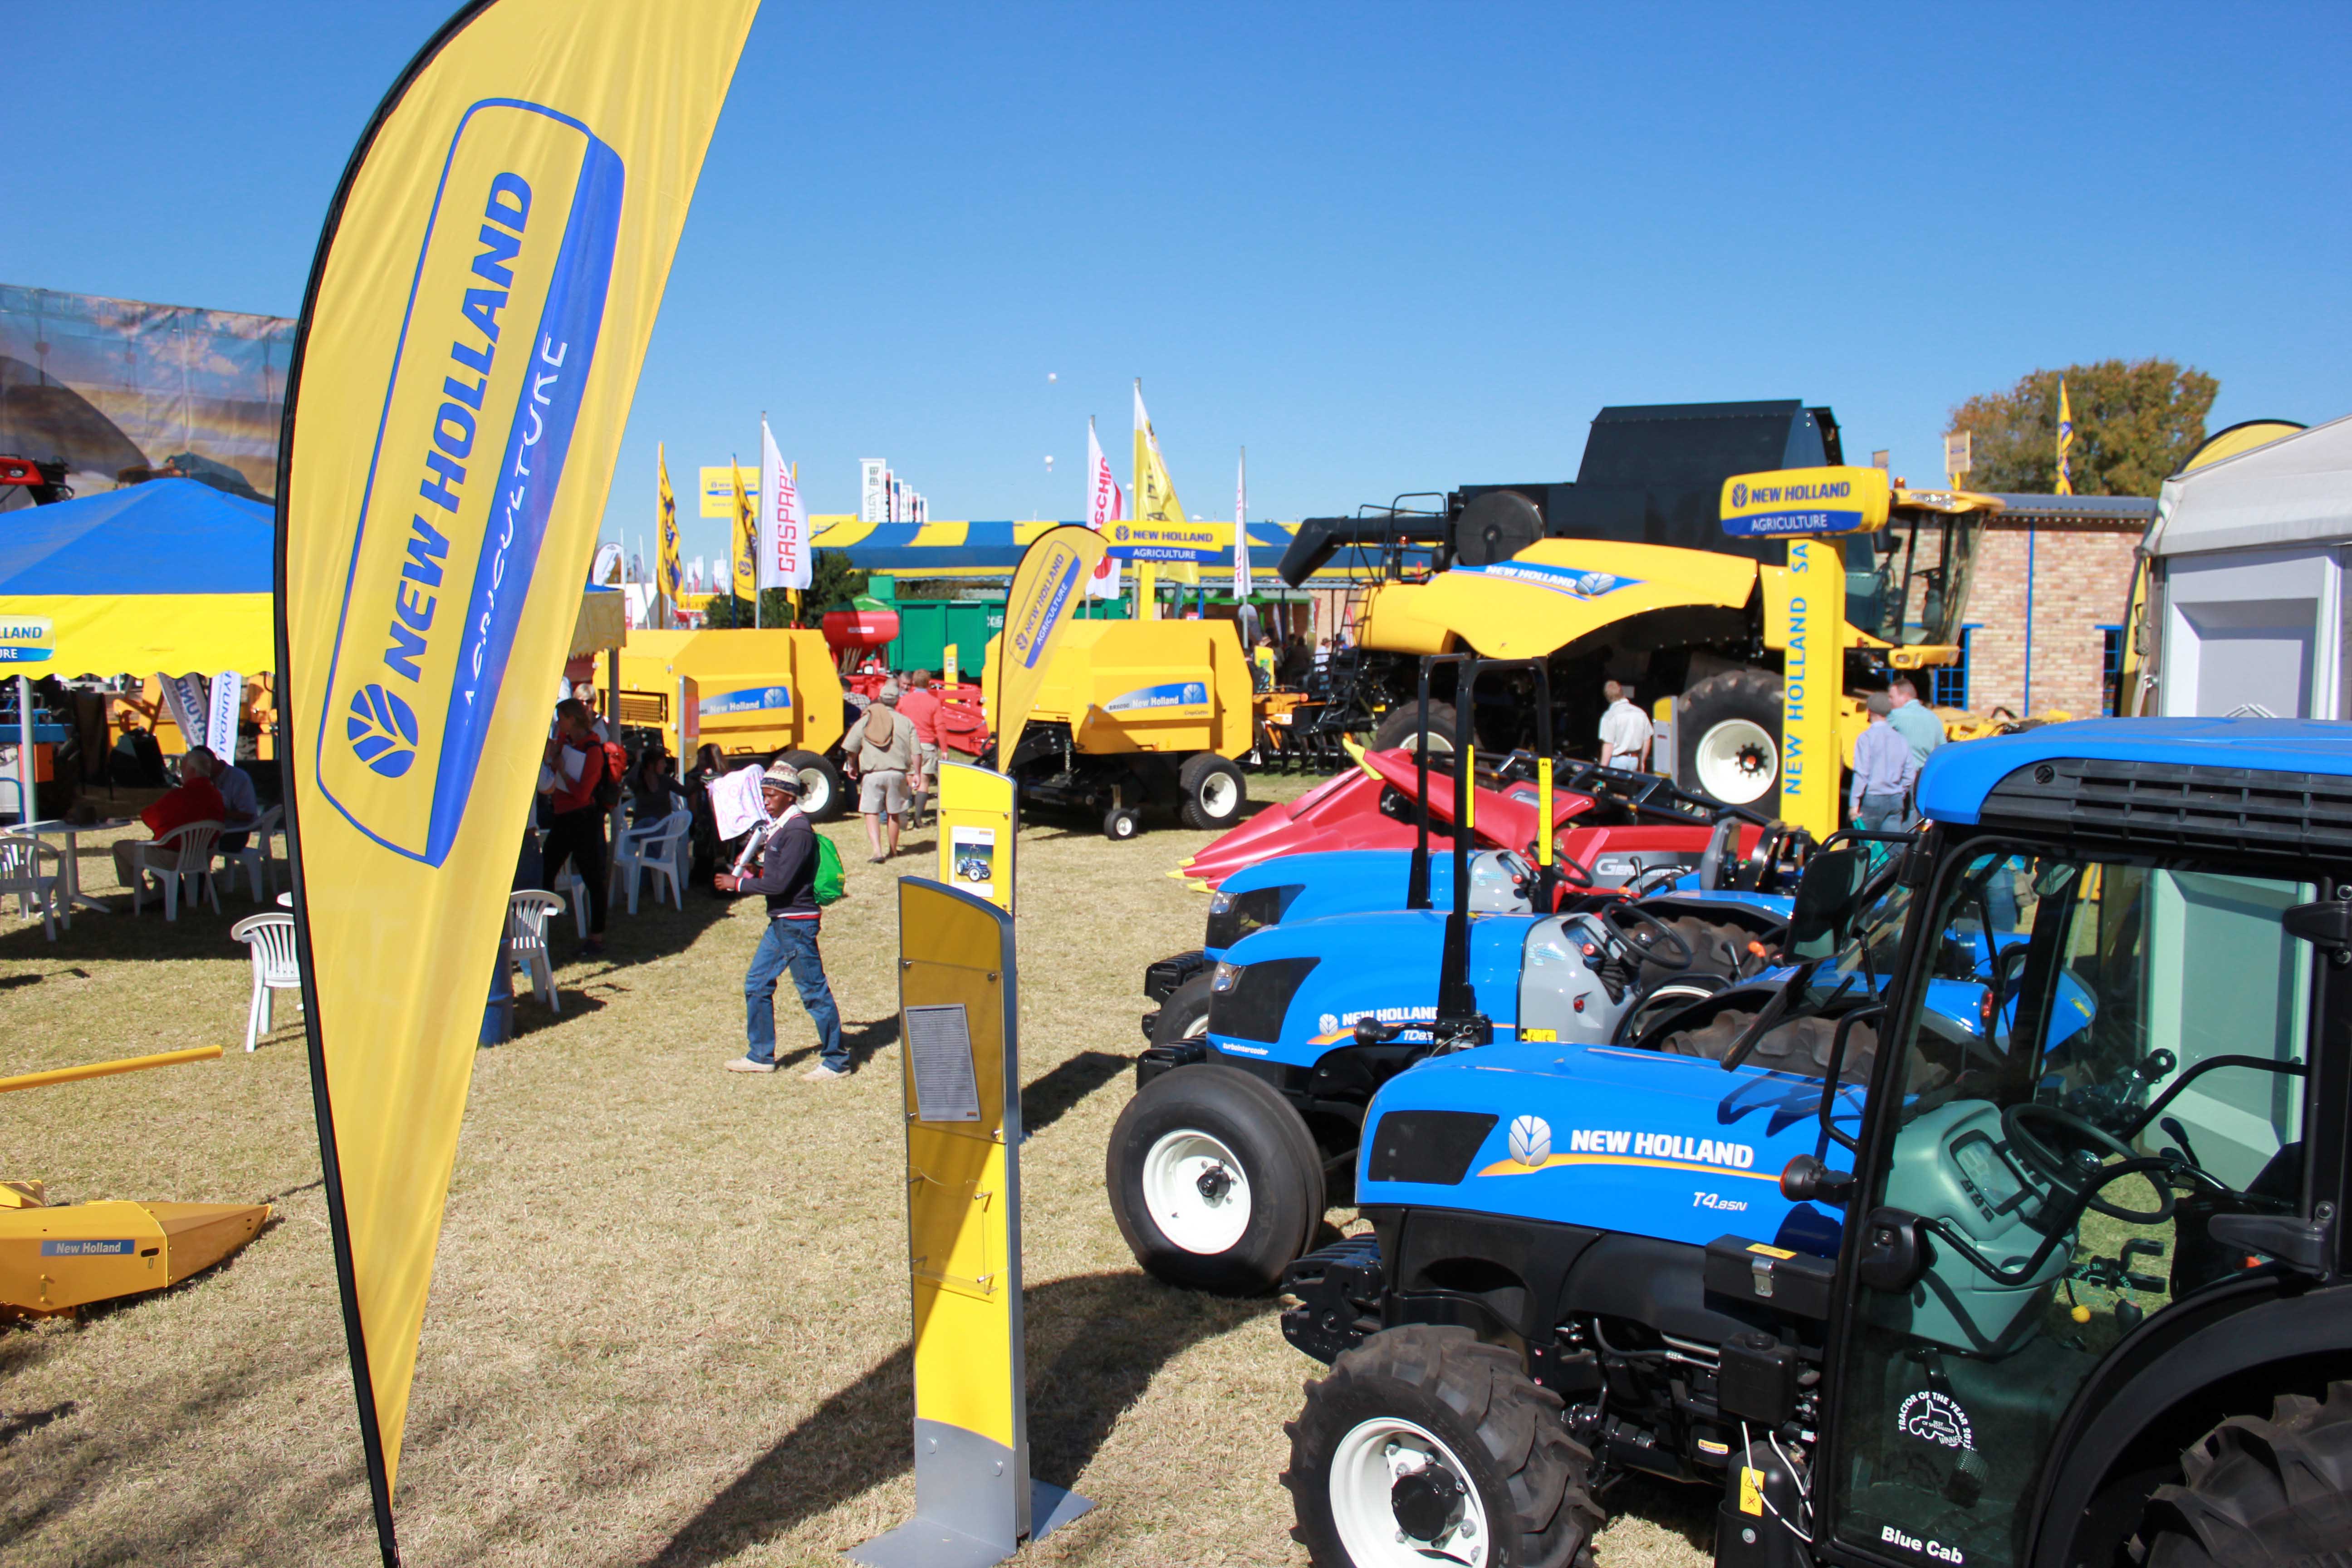 NEW HOLLAND SHOWS ADVANCED TECHNOLOGIES AND PRODUCTS IN HIGH-IMPACT STAND AT NAMPO SHOW